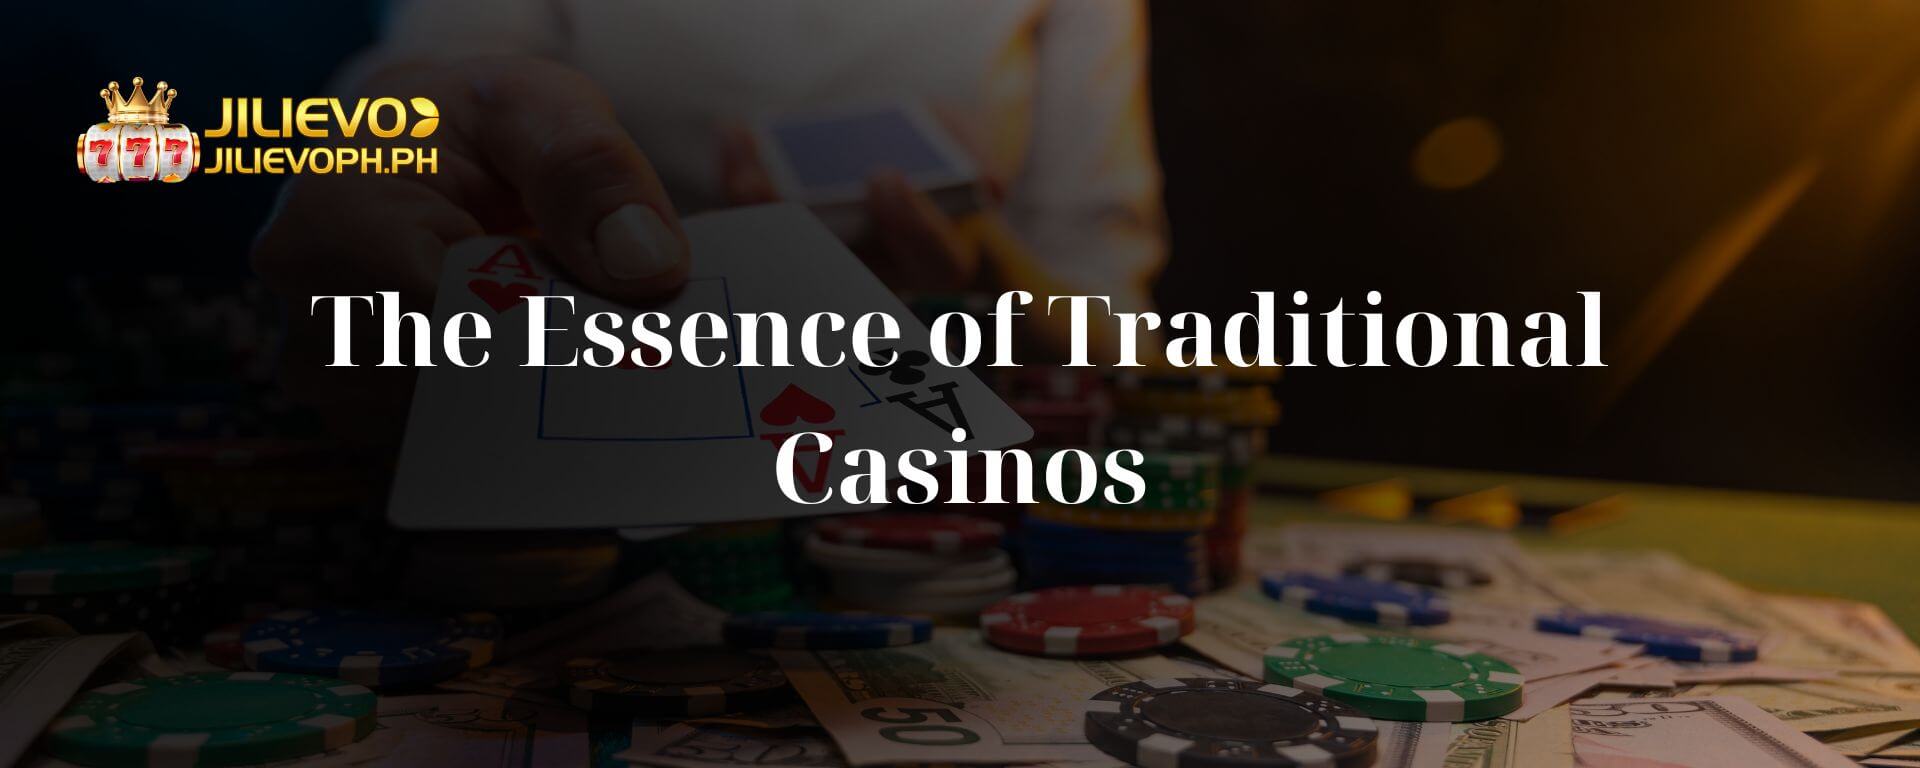 The Essence of Traditional Casinos